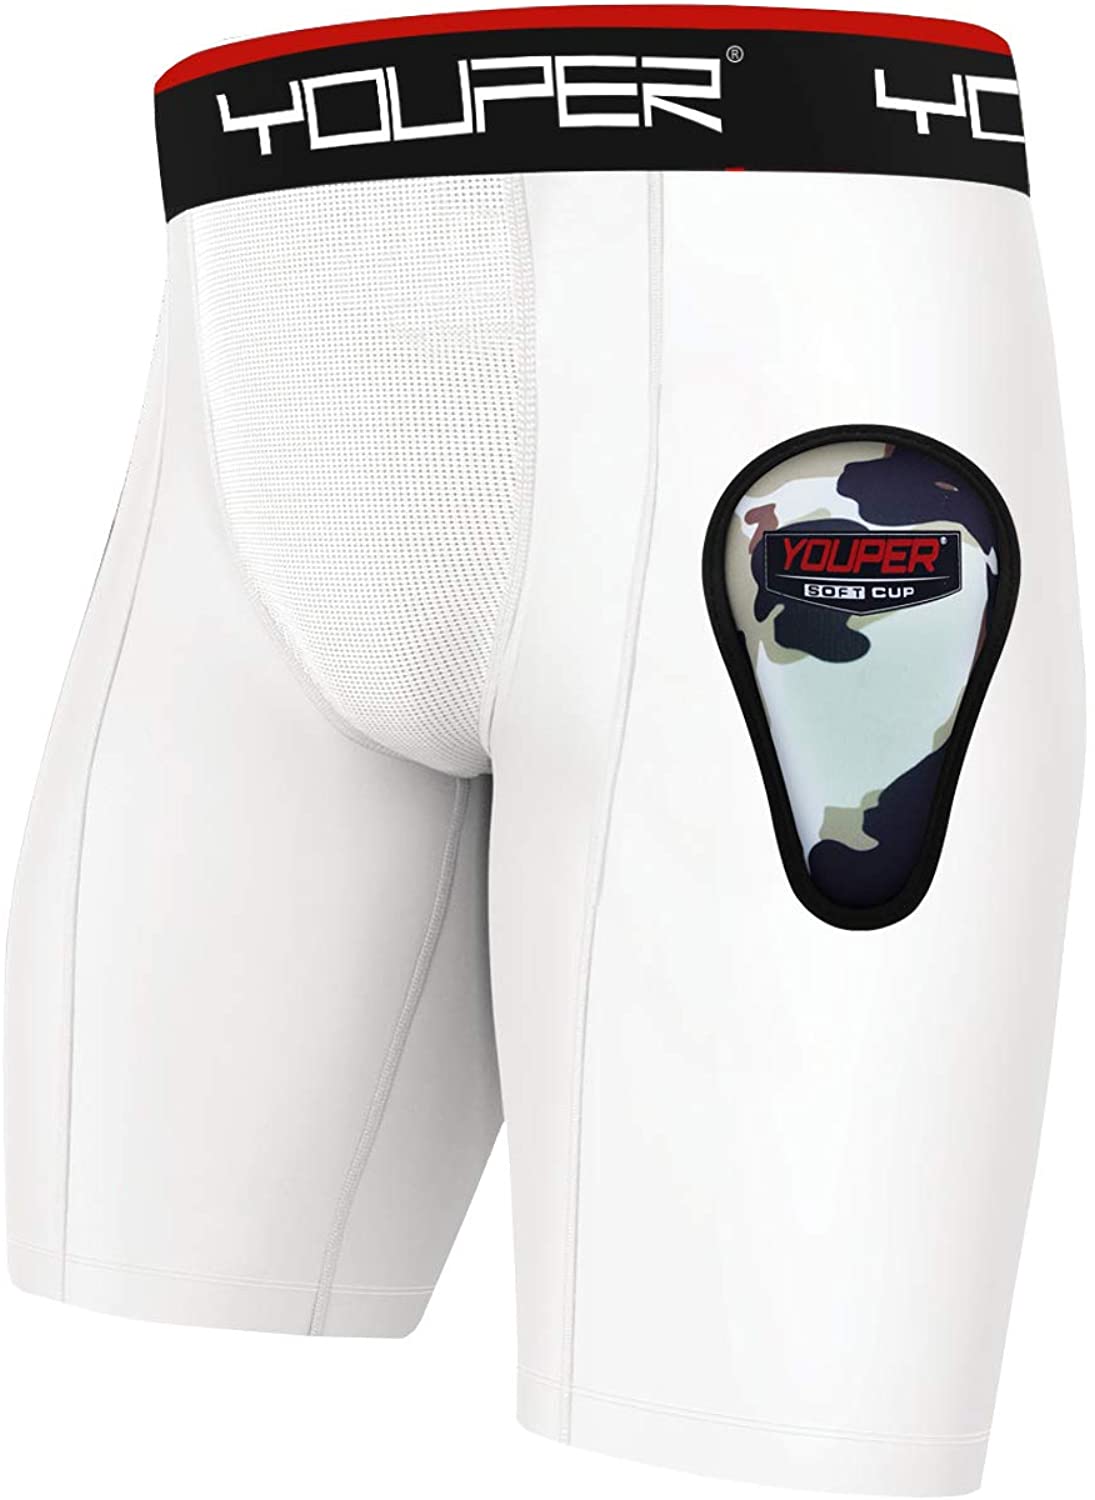 Youper Athletic Supporter, Compression Shorts w/Cup Pocket